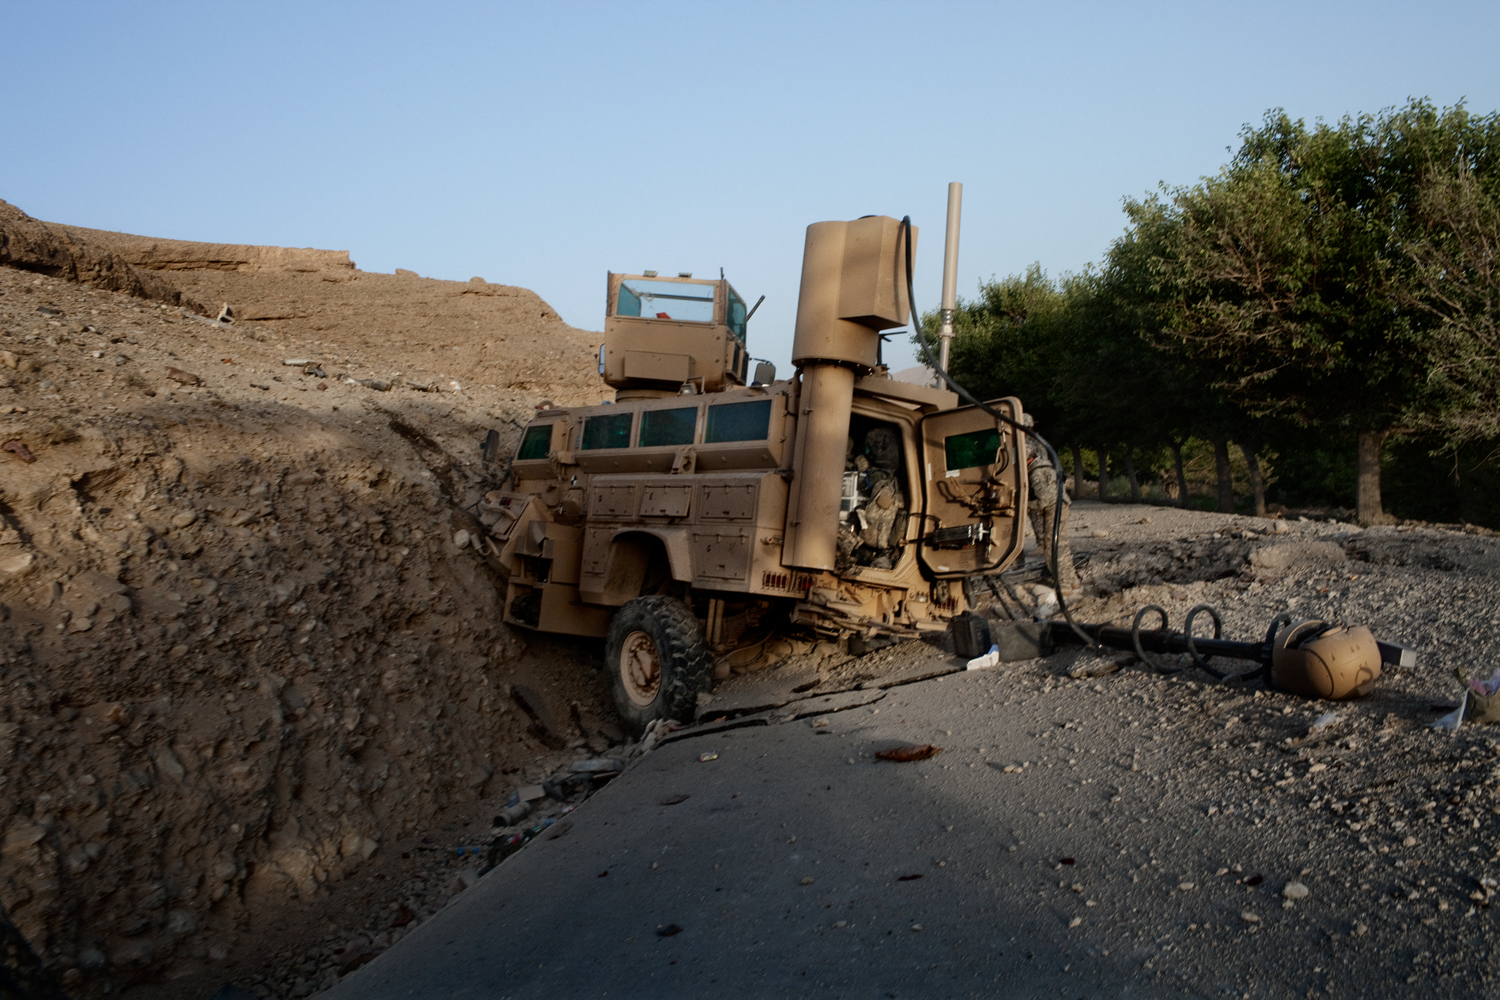  A Mine Resistant Ambush Protected Vehicle sits on the road after being attacked by an improvised explosive device in the Tangi Valley, Wardak Province, Afghanistan.    